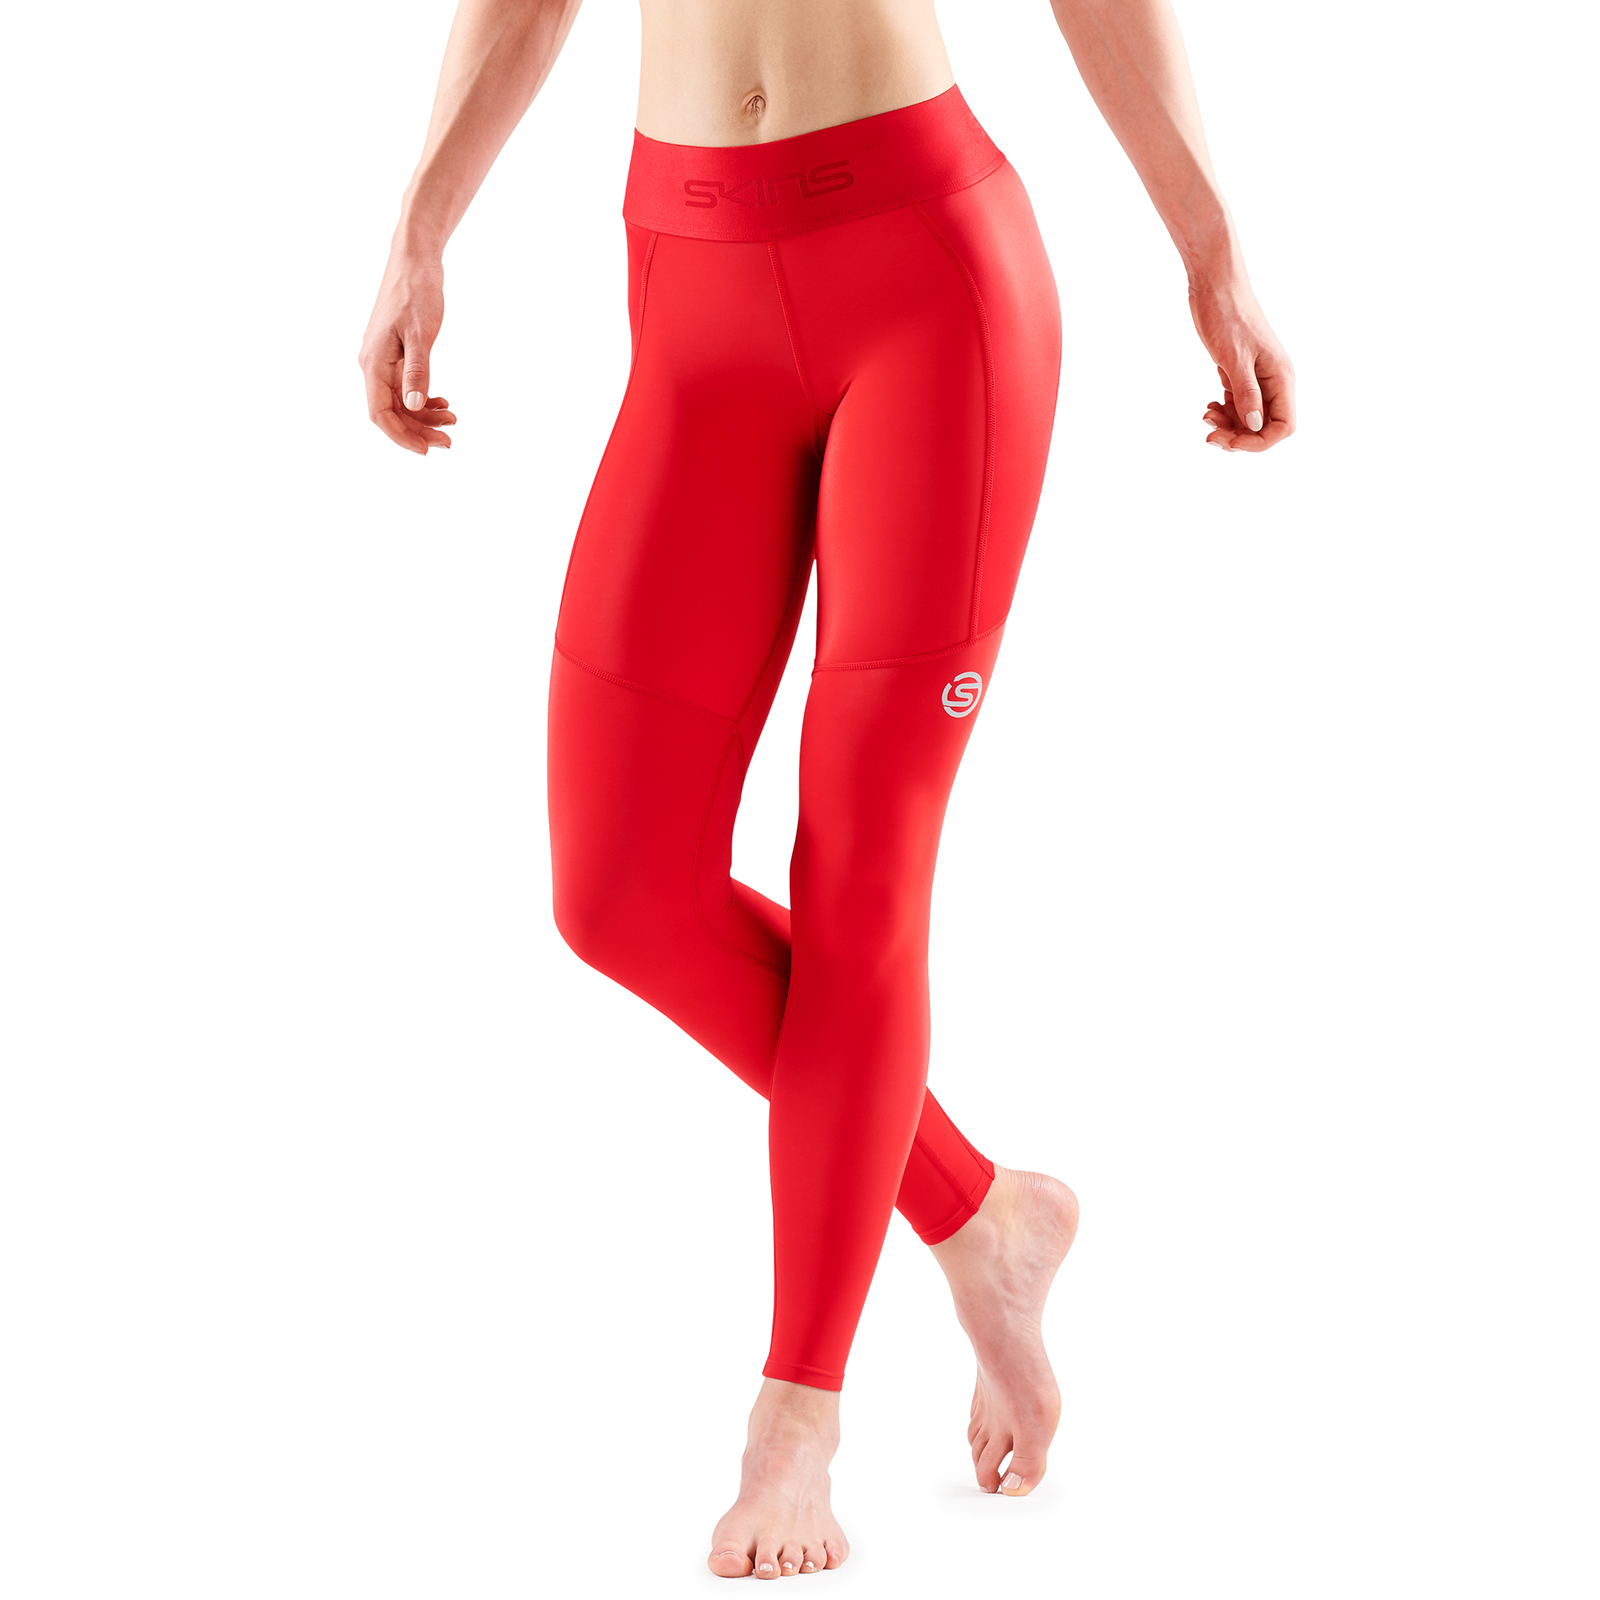 Pack of 3 Red Plain Tights for Girls/Women - Three Red Leggings/Tights